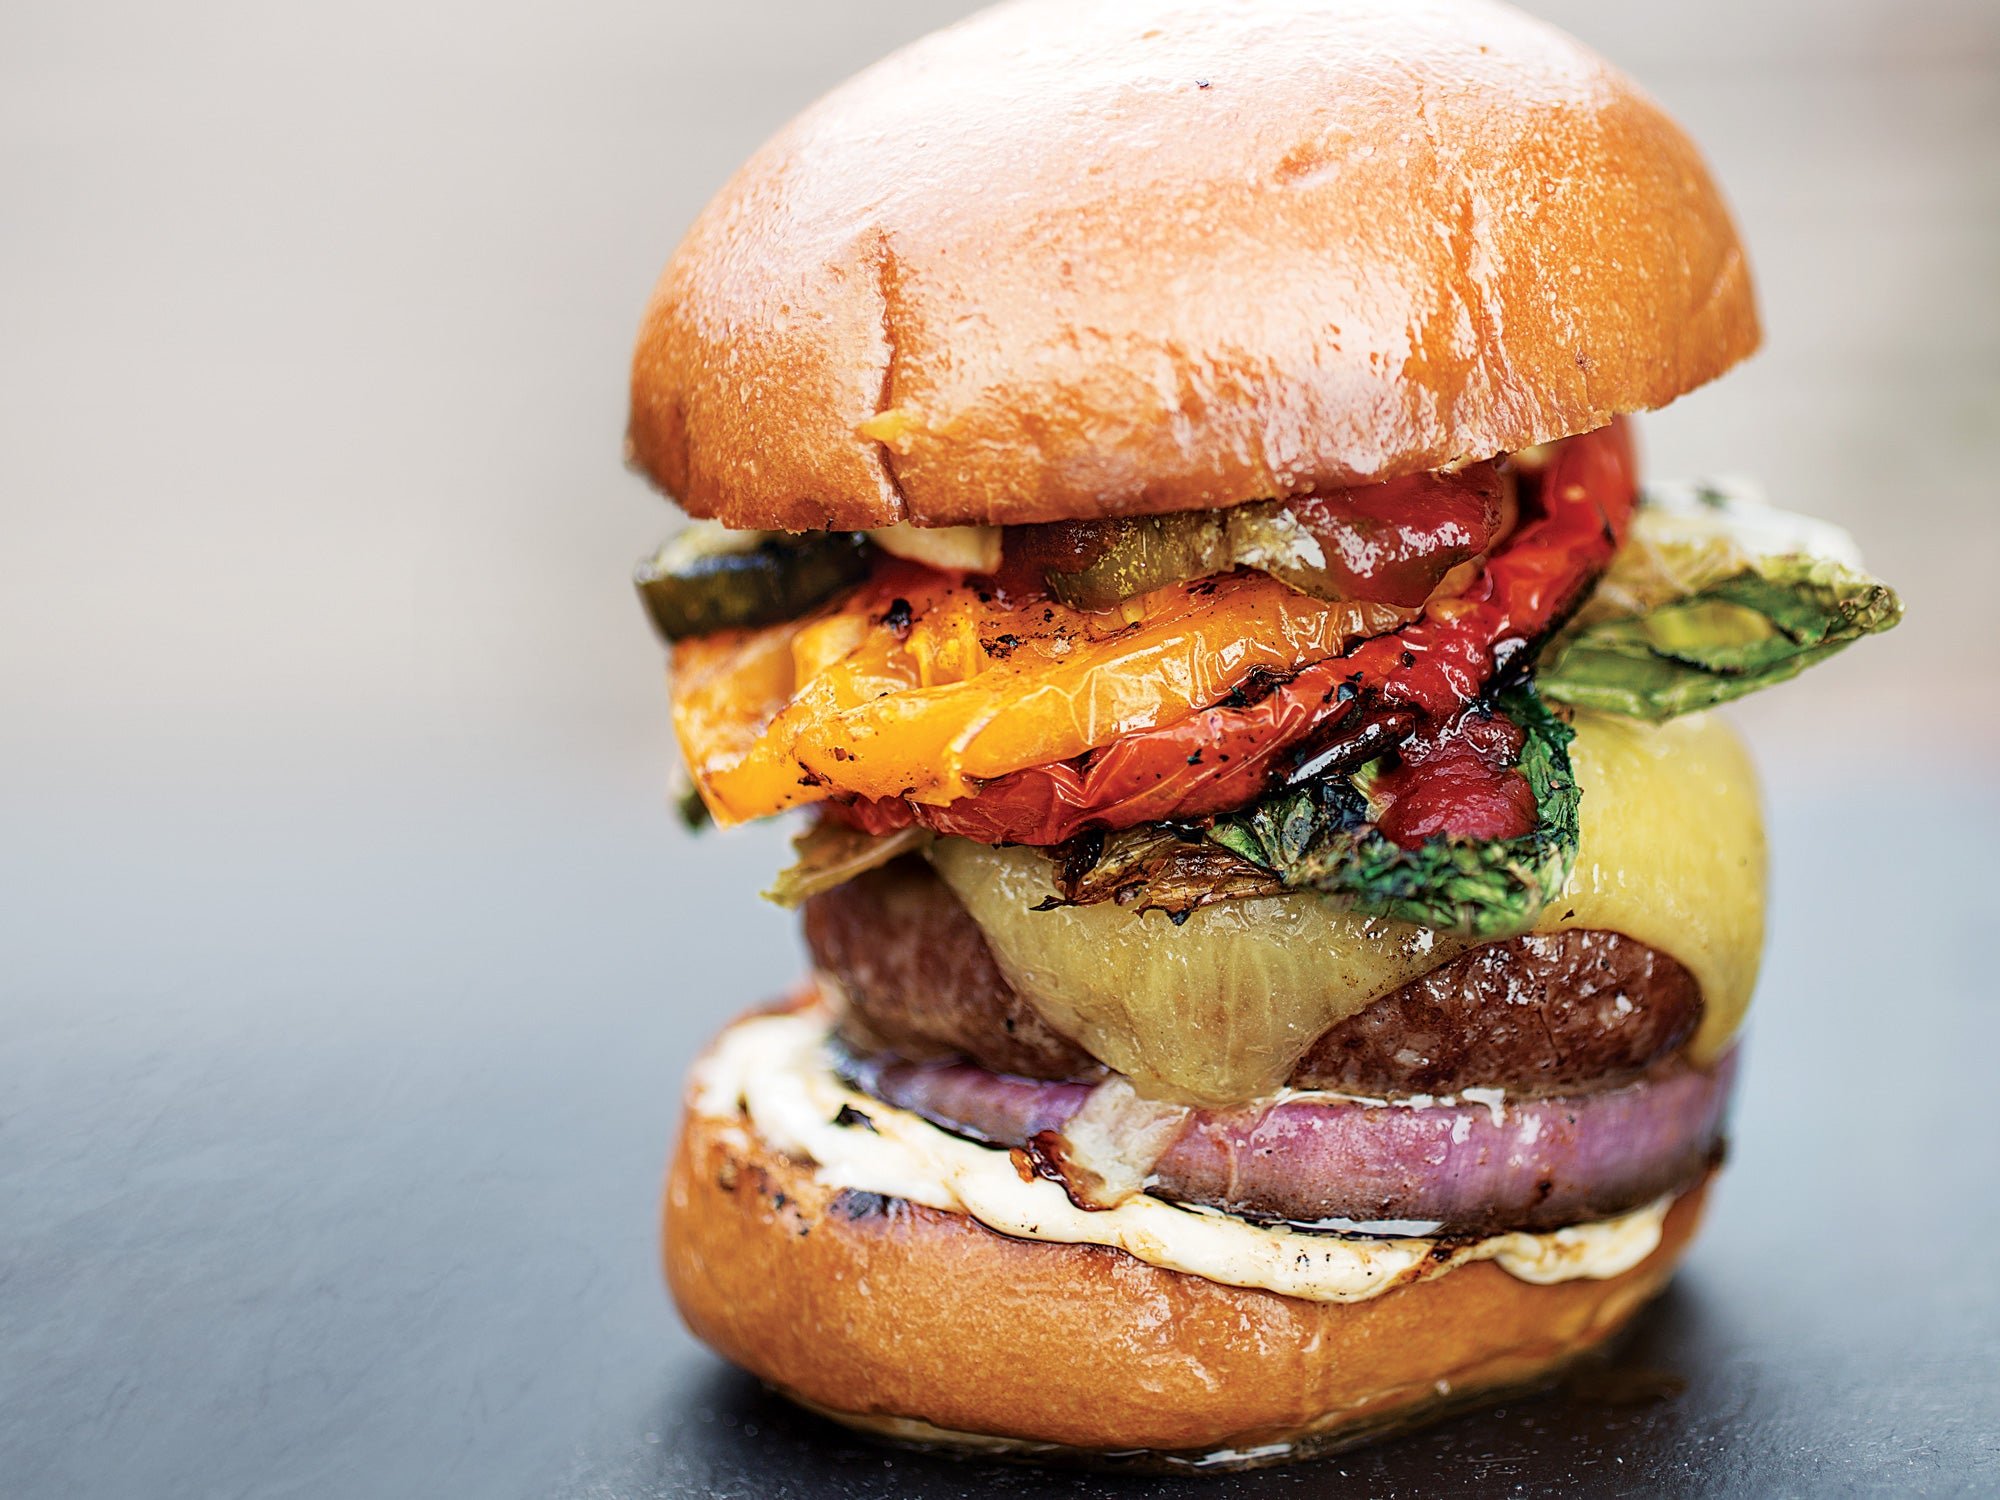 We rounded up our favorite hamburger recipes - cover